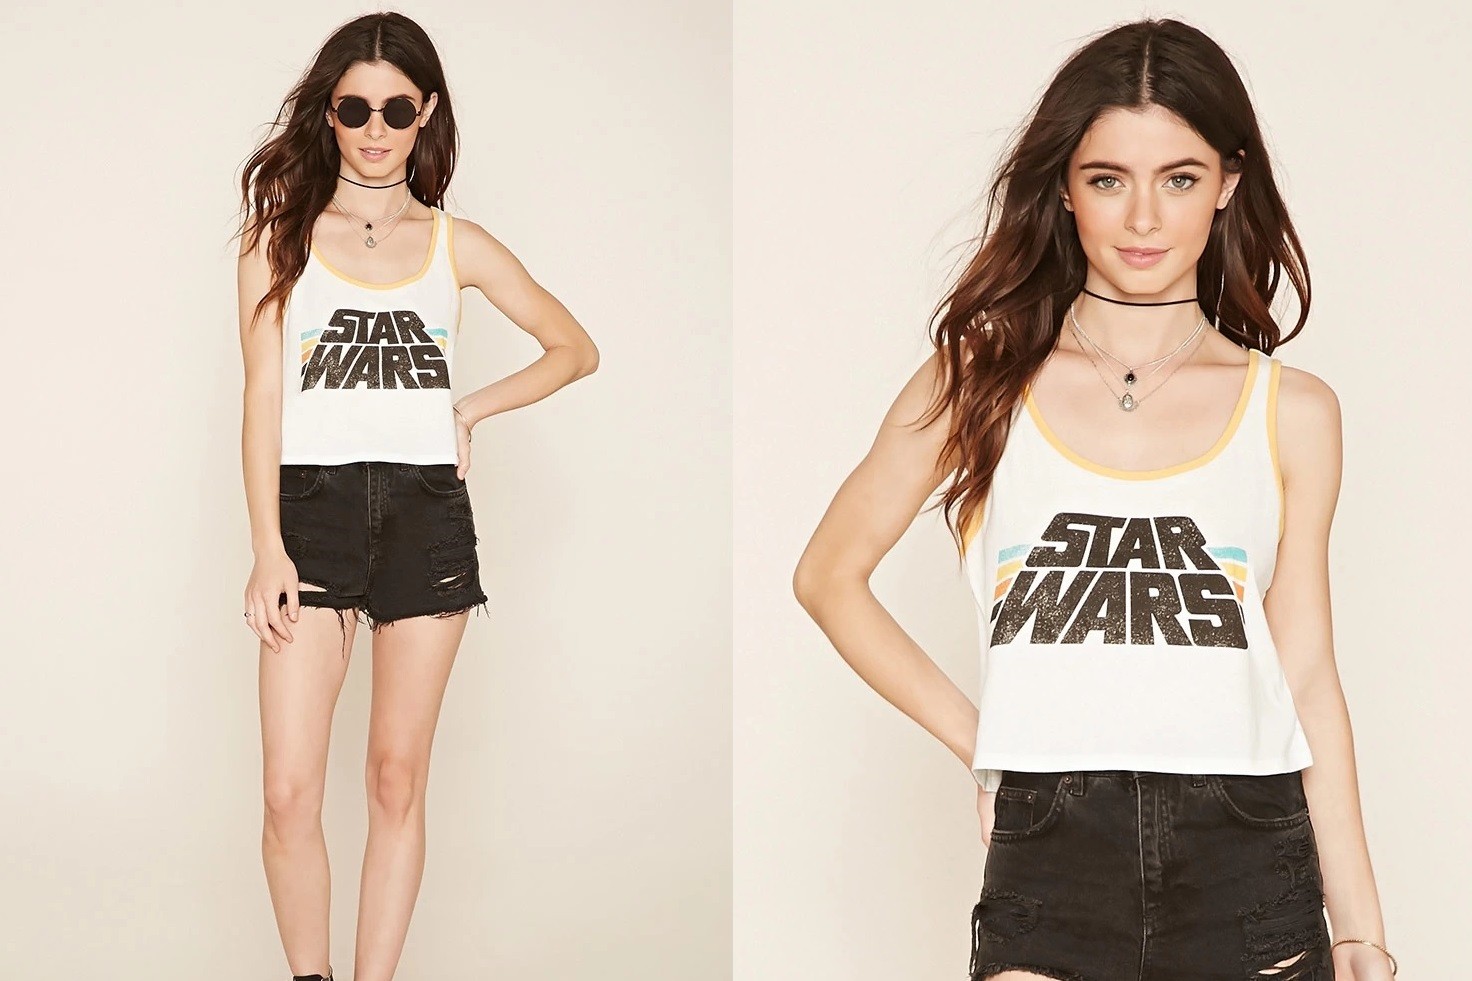 New Star Wars crop top at Forever 21